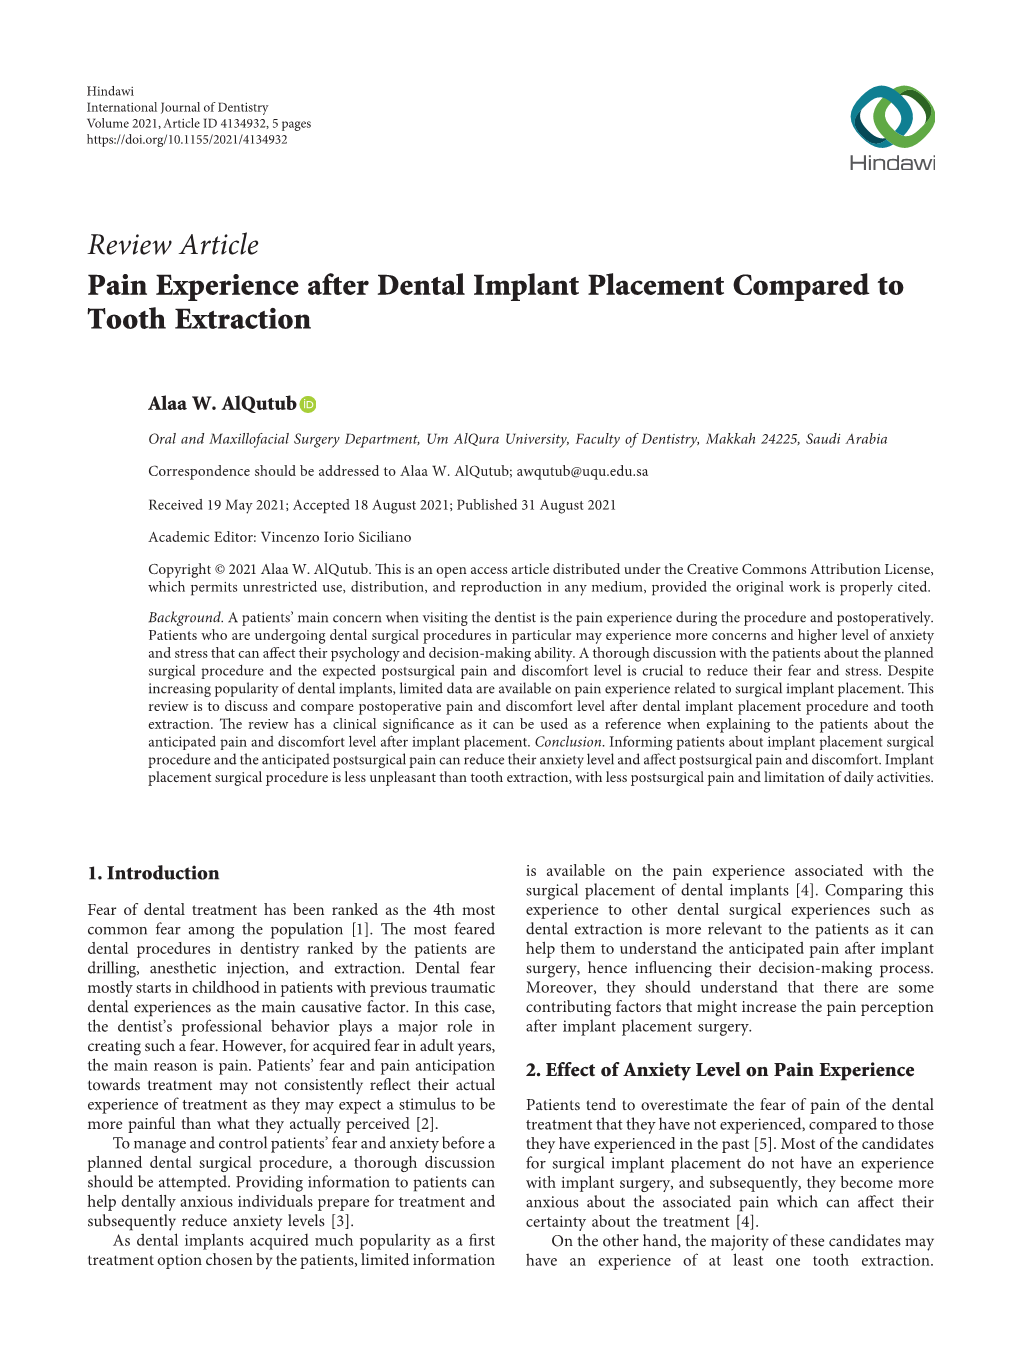 Review Article Pain Experience After Dental Implant Placement Compared to Tooth Extraction